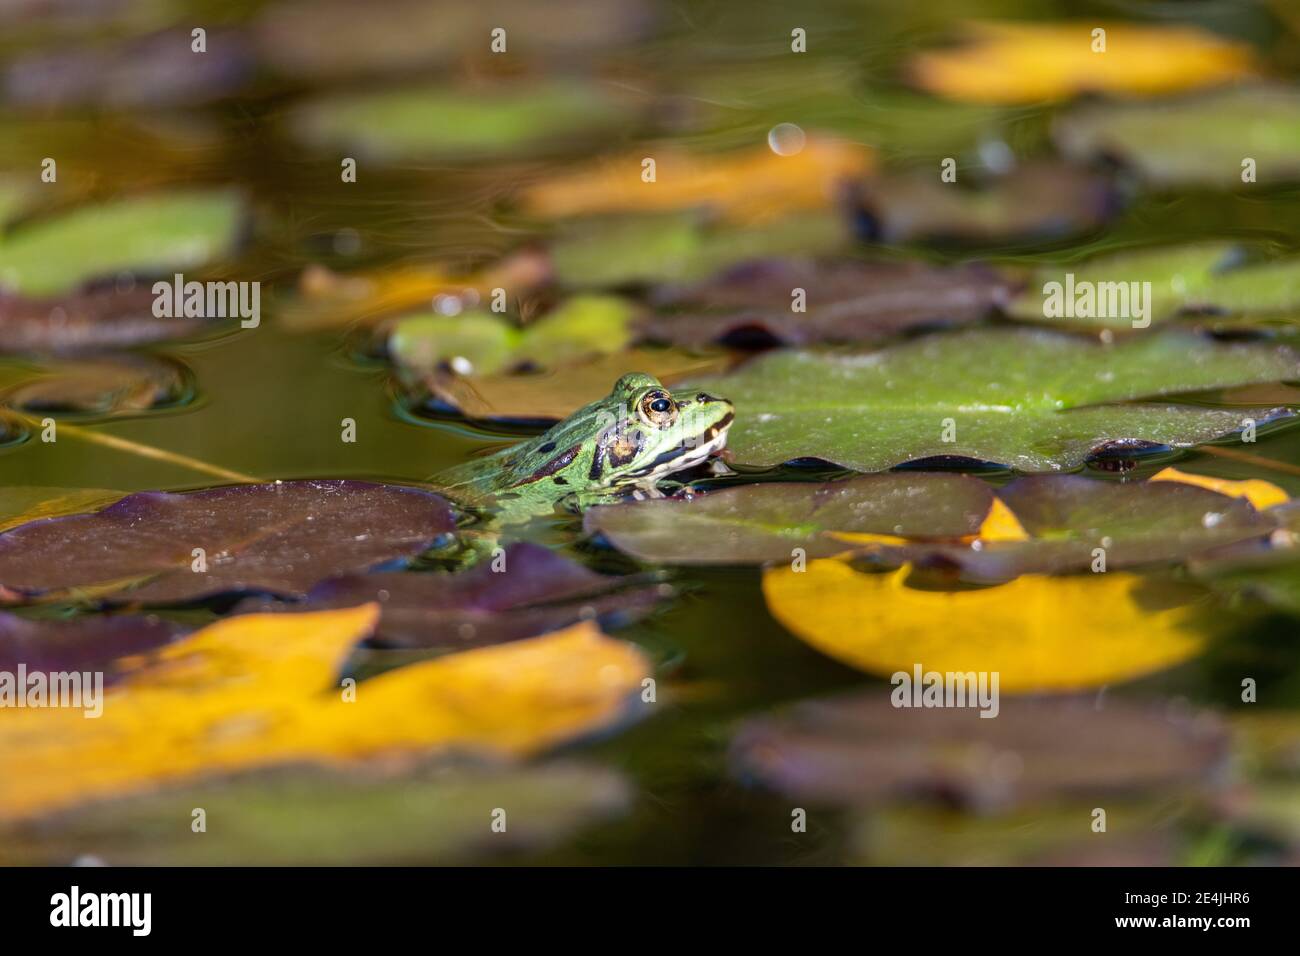 Frog sticking its head out of the water, sitting in the water, amongst water lillys and sea roses Stock Photo